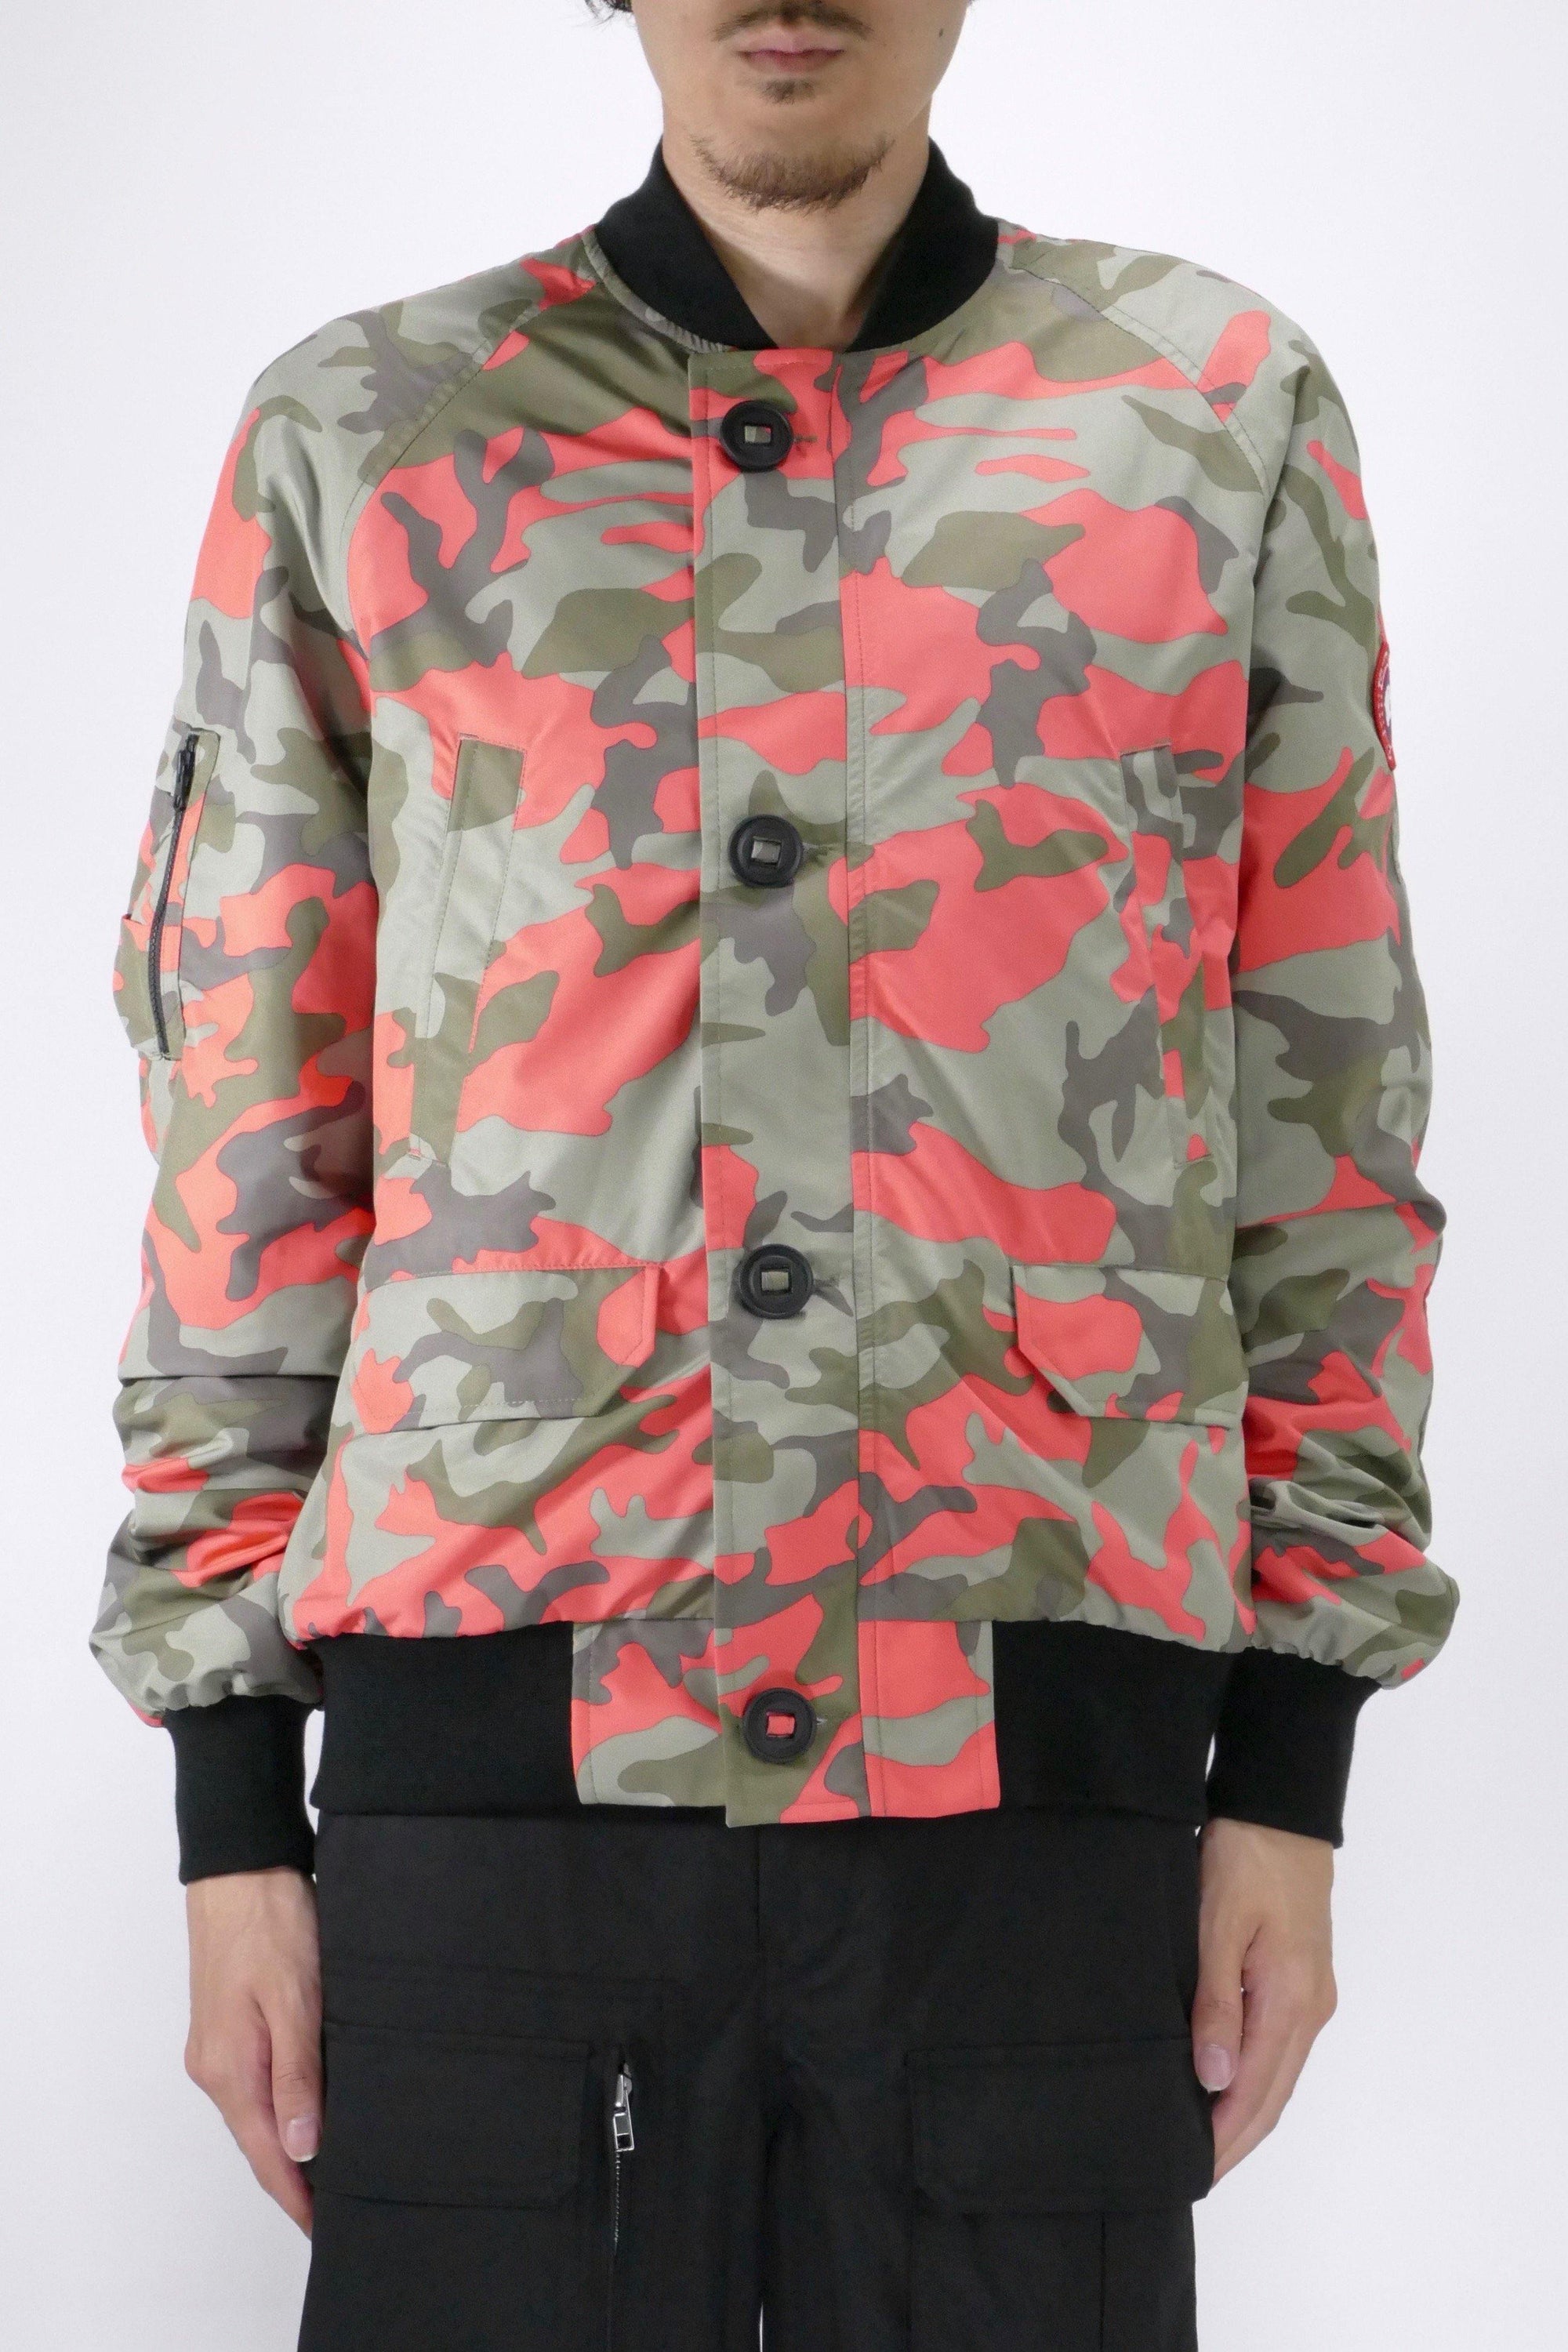 Canada Goose Mens Wind Jacket Faber Bomber Print - Fire Bud Camo - Due West